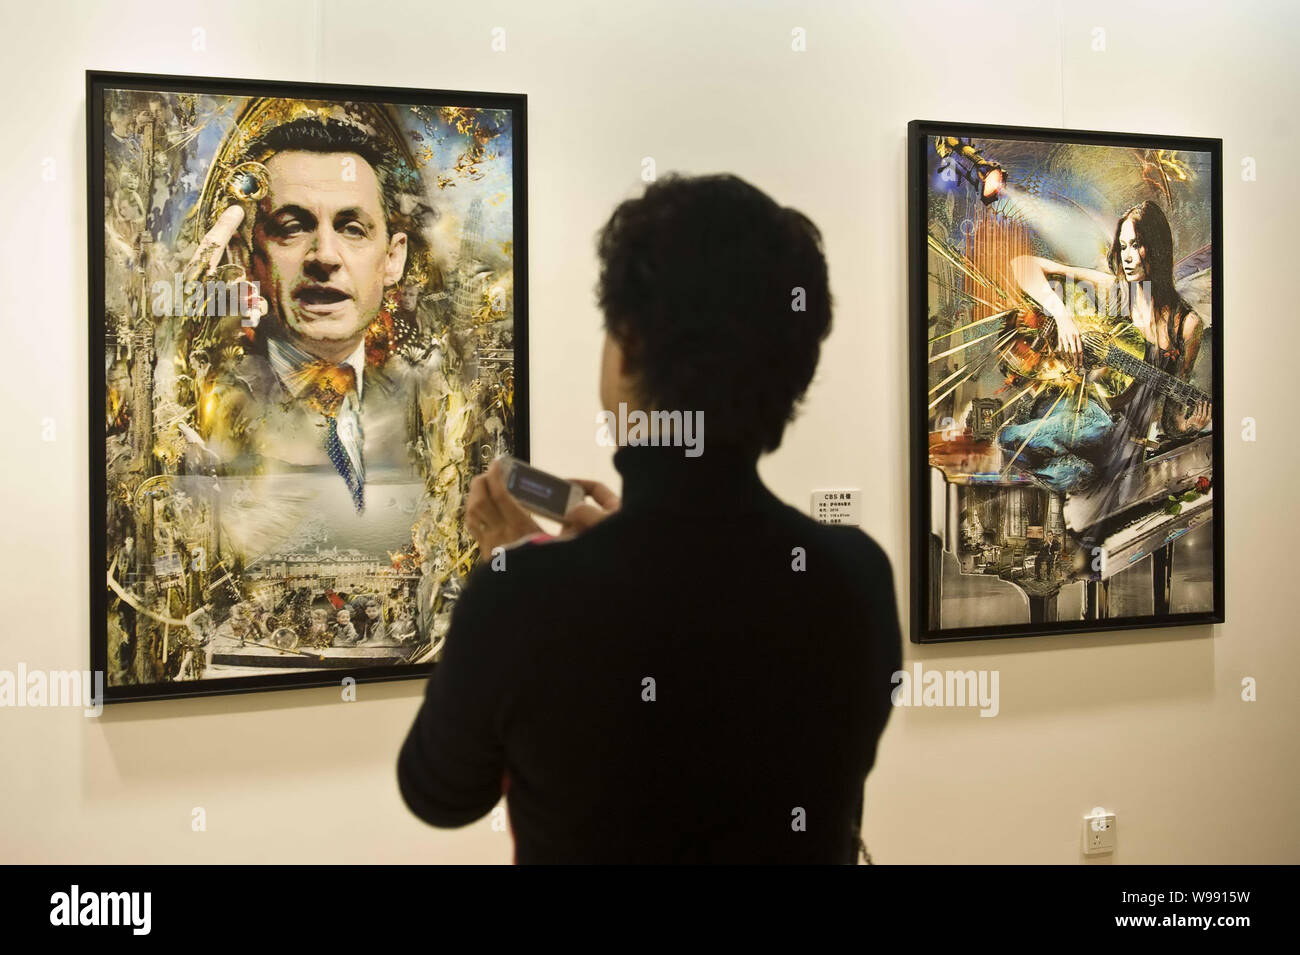 A visitor takes photos of a portrait of Nicolas Sarkozy at an art exhibition featuring the works of Pal Sarkozy, father of French President Nicolas Sa Stock Photo